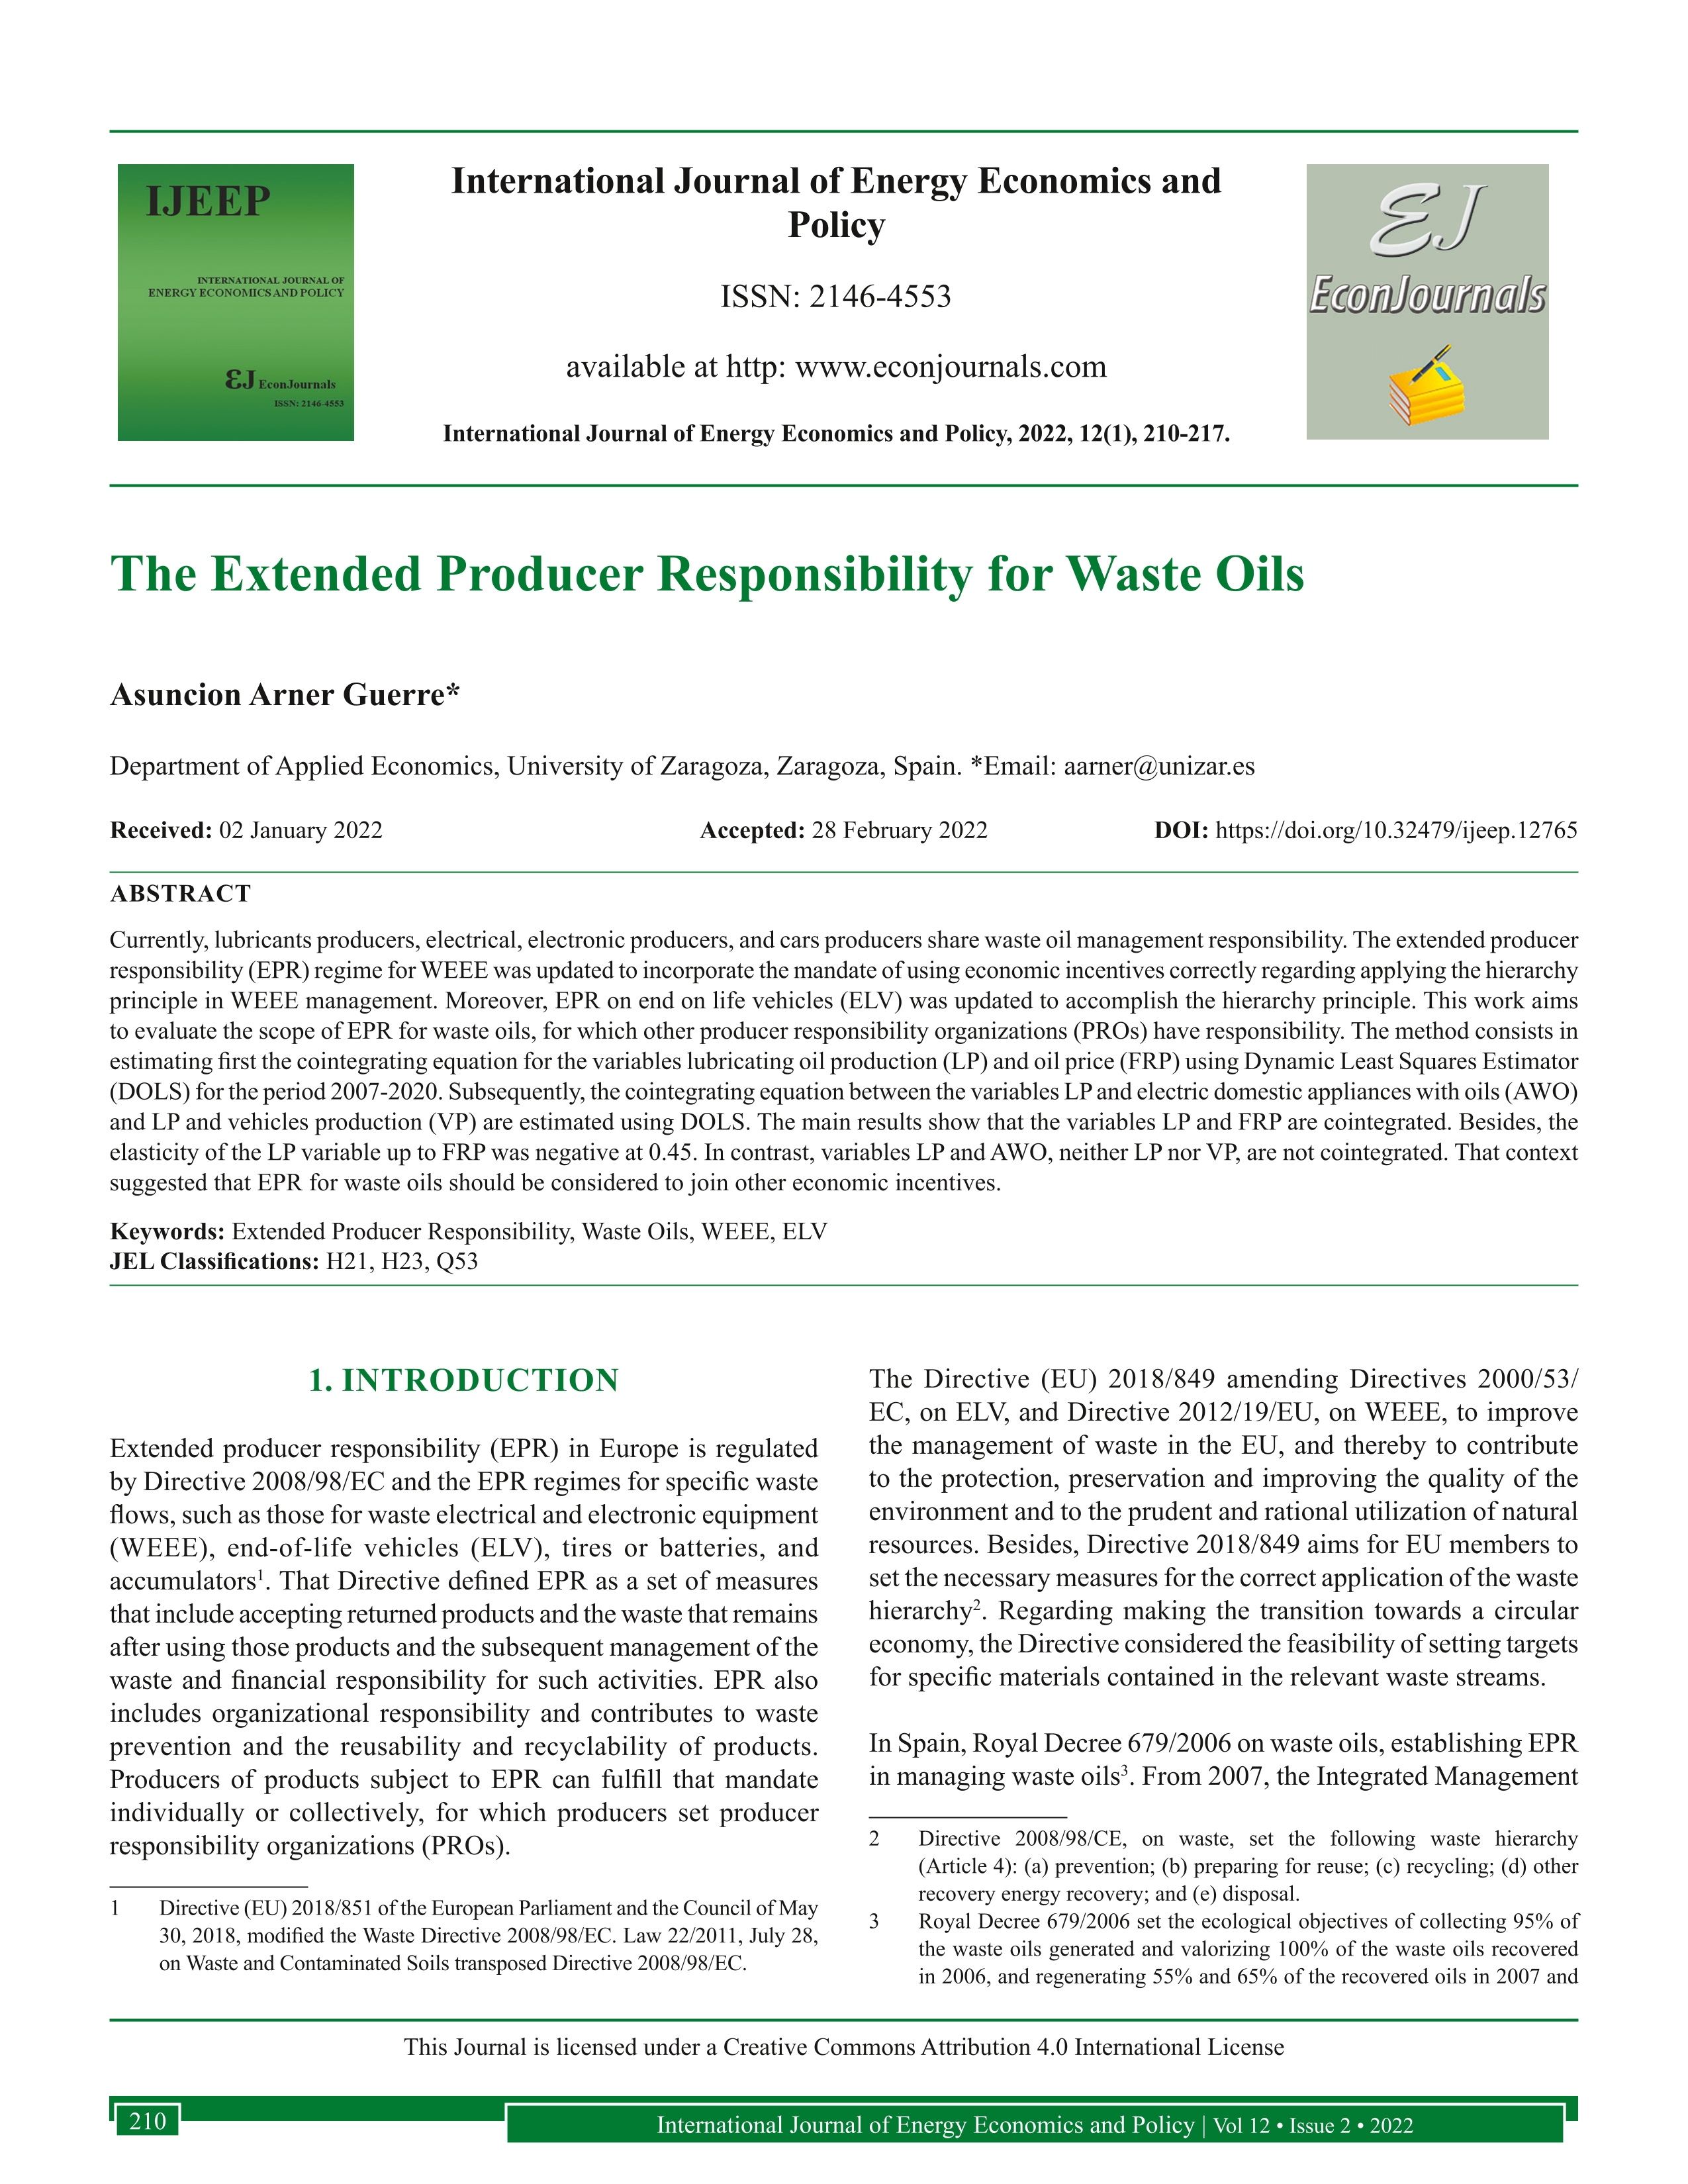 The Extended Producer Responsibility for Waste Oils